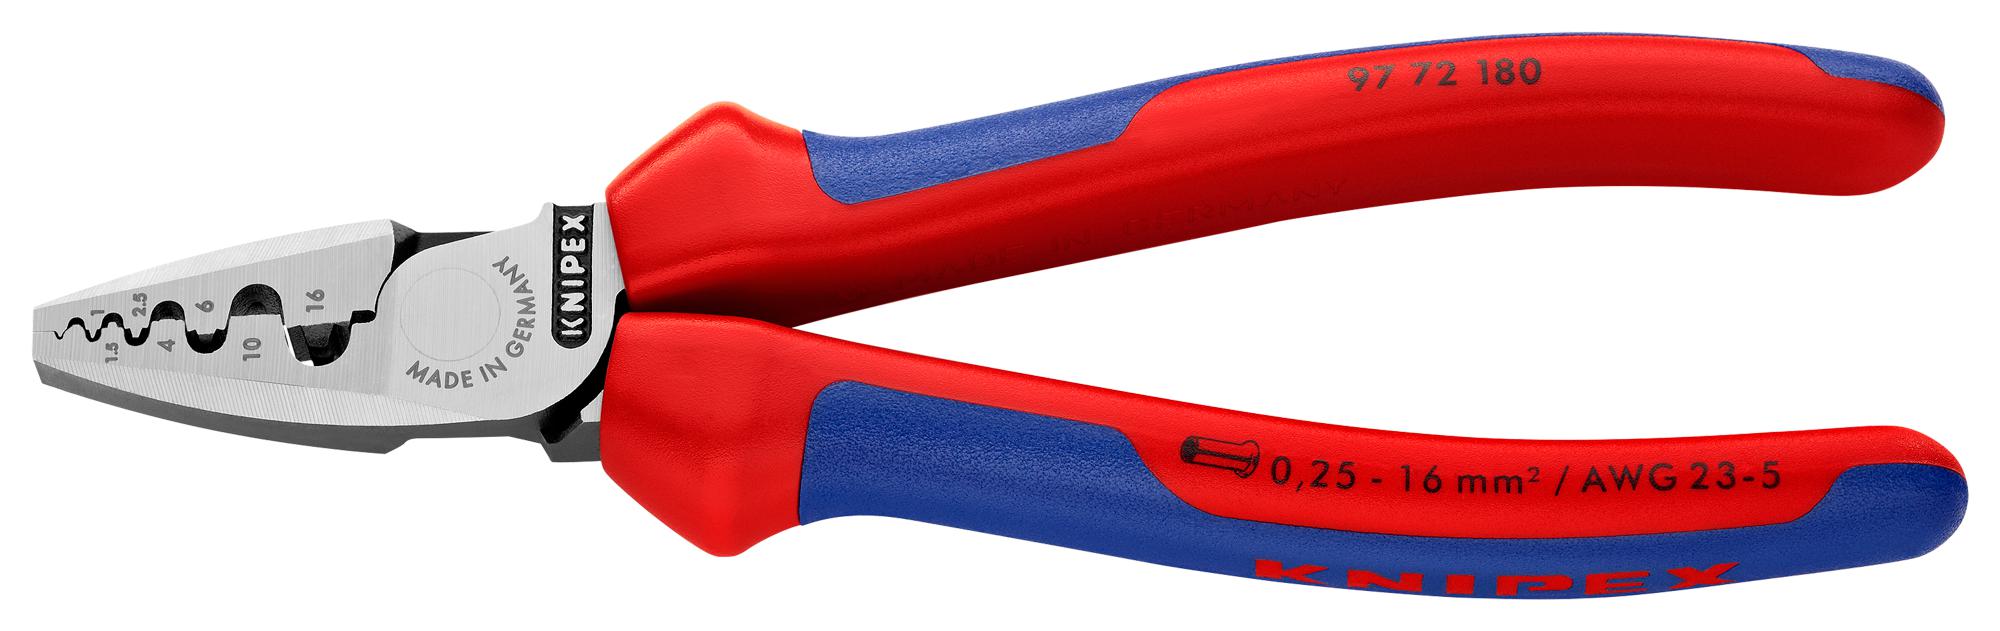 97 72 180 CRIMP PLIER, FOR CABLE LINKS KNIPEX